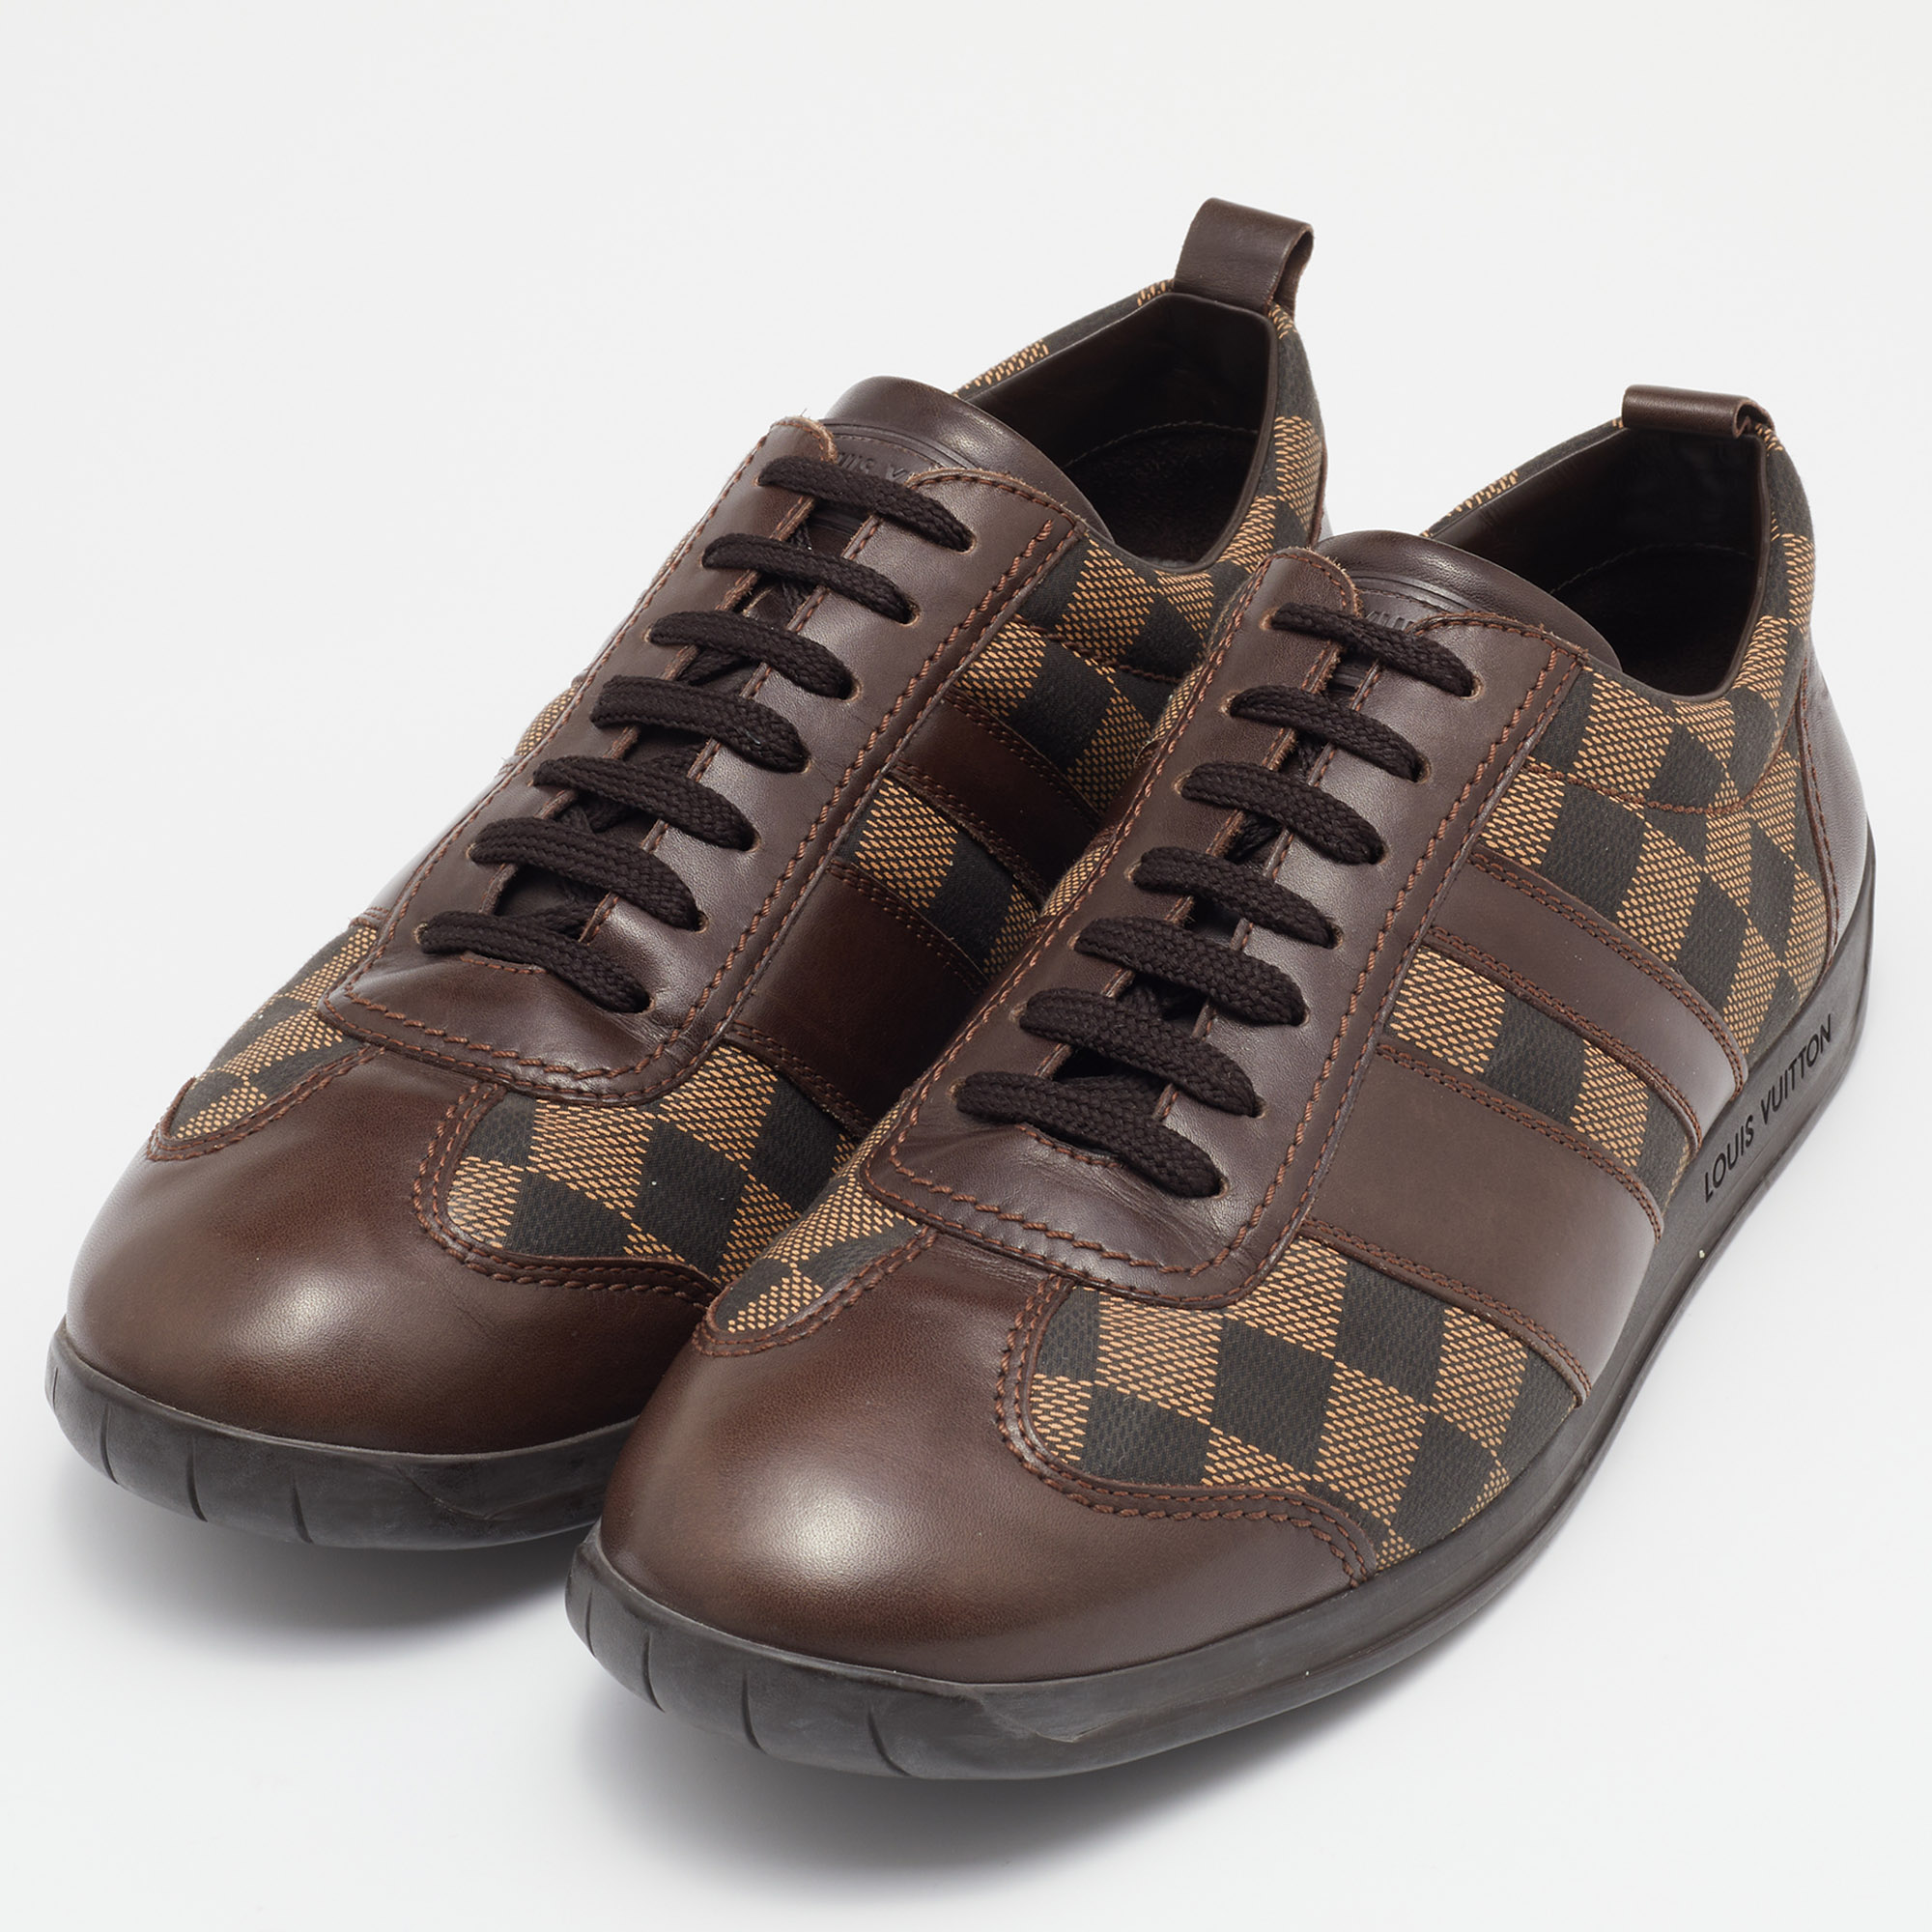 

Louis Vuitton Two Tone Damier Ebene Fabric And Leather Low Top Sneakers Size, Brown